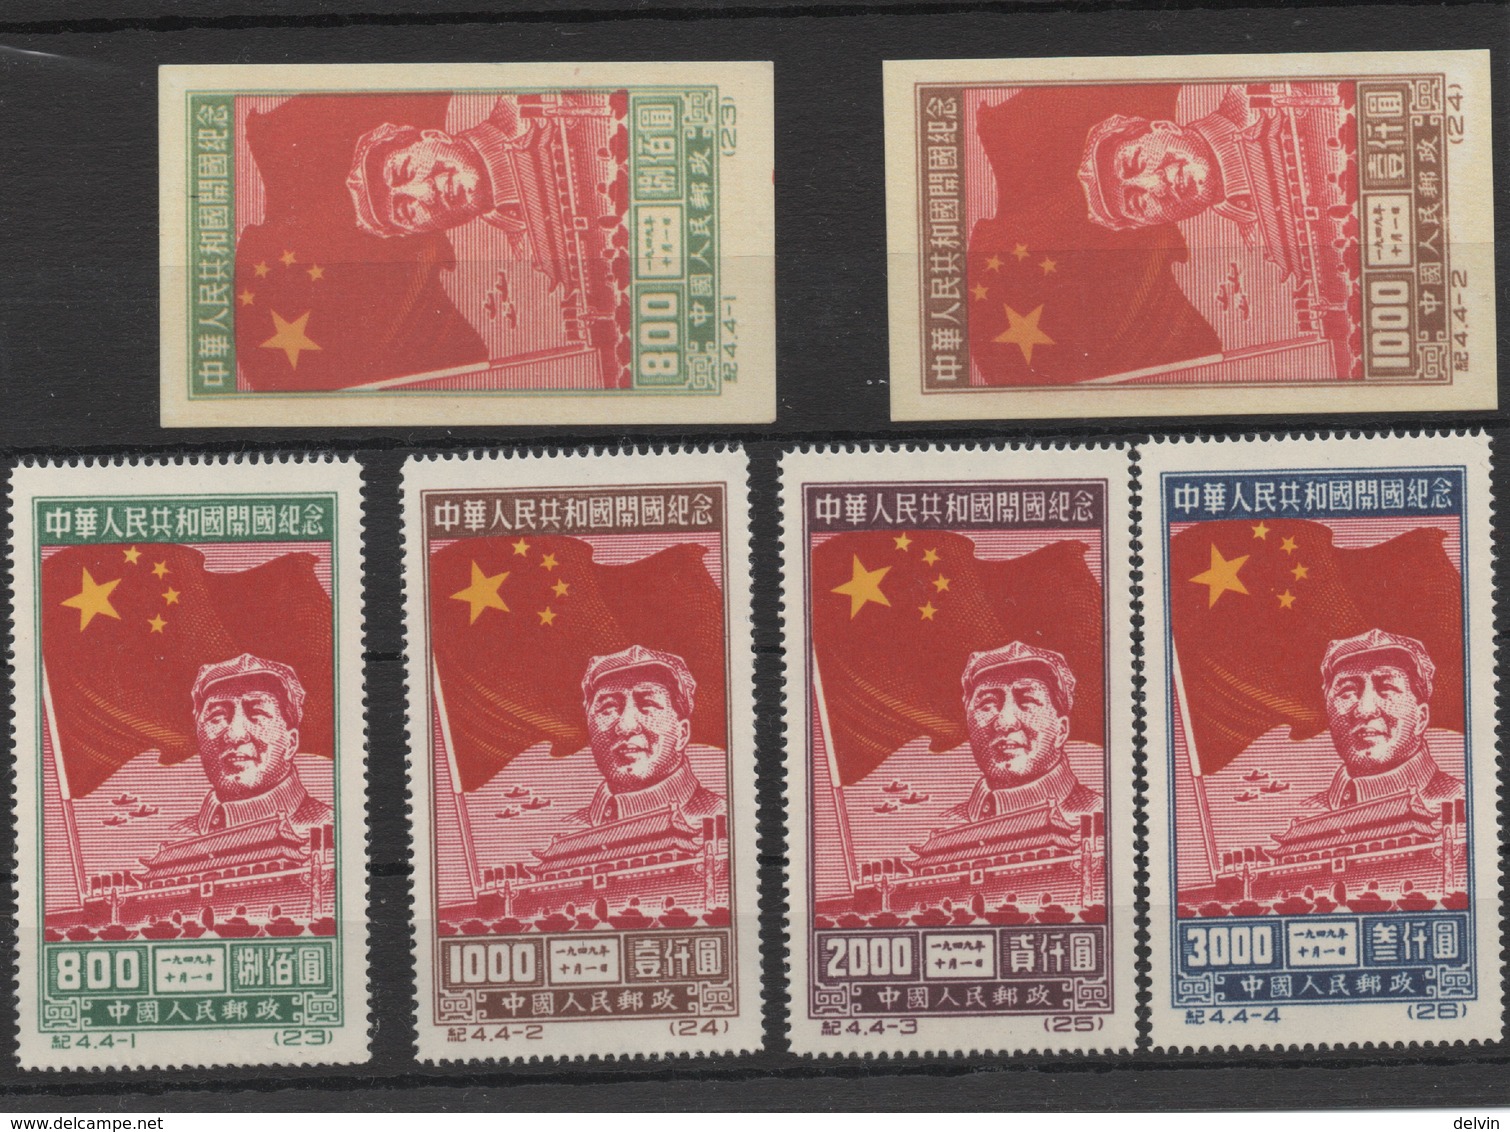 China 1950-Mao Tze Tung And Flag -4 Complete Sets Of 24 Stamps Perf.& Imperf. Reprint Of The Era. New No Gum (see Photo) - Official Reprints